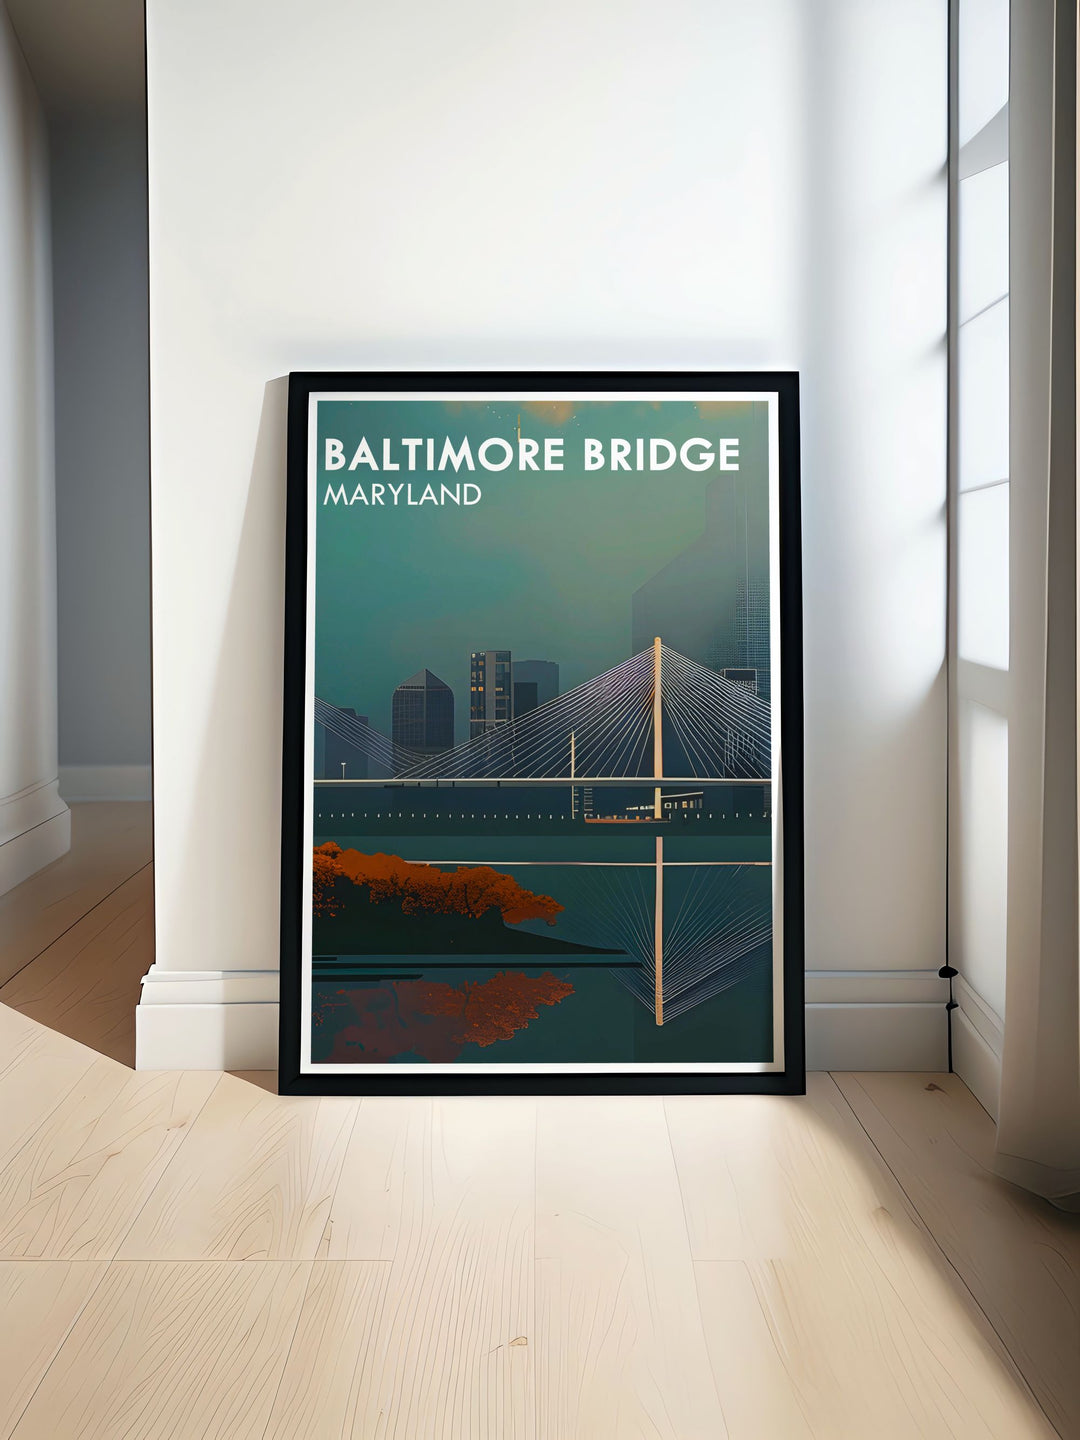 Detailed illustration of the new Key Bridge design in Baltimore. The bridge spans across the water with the city skyline in the background. Perfect for home decor and gifts for friends who love Maryland artwork and Baltimore wall art.